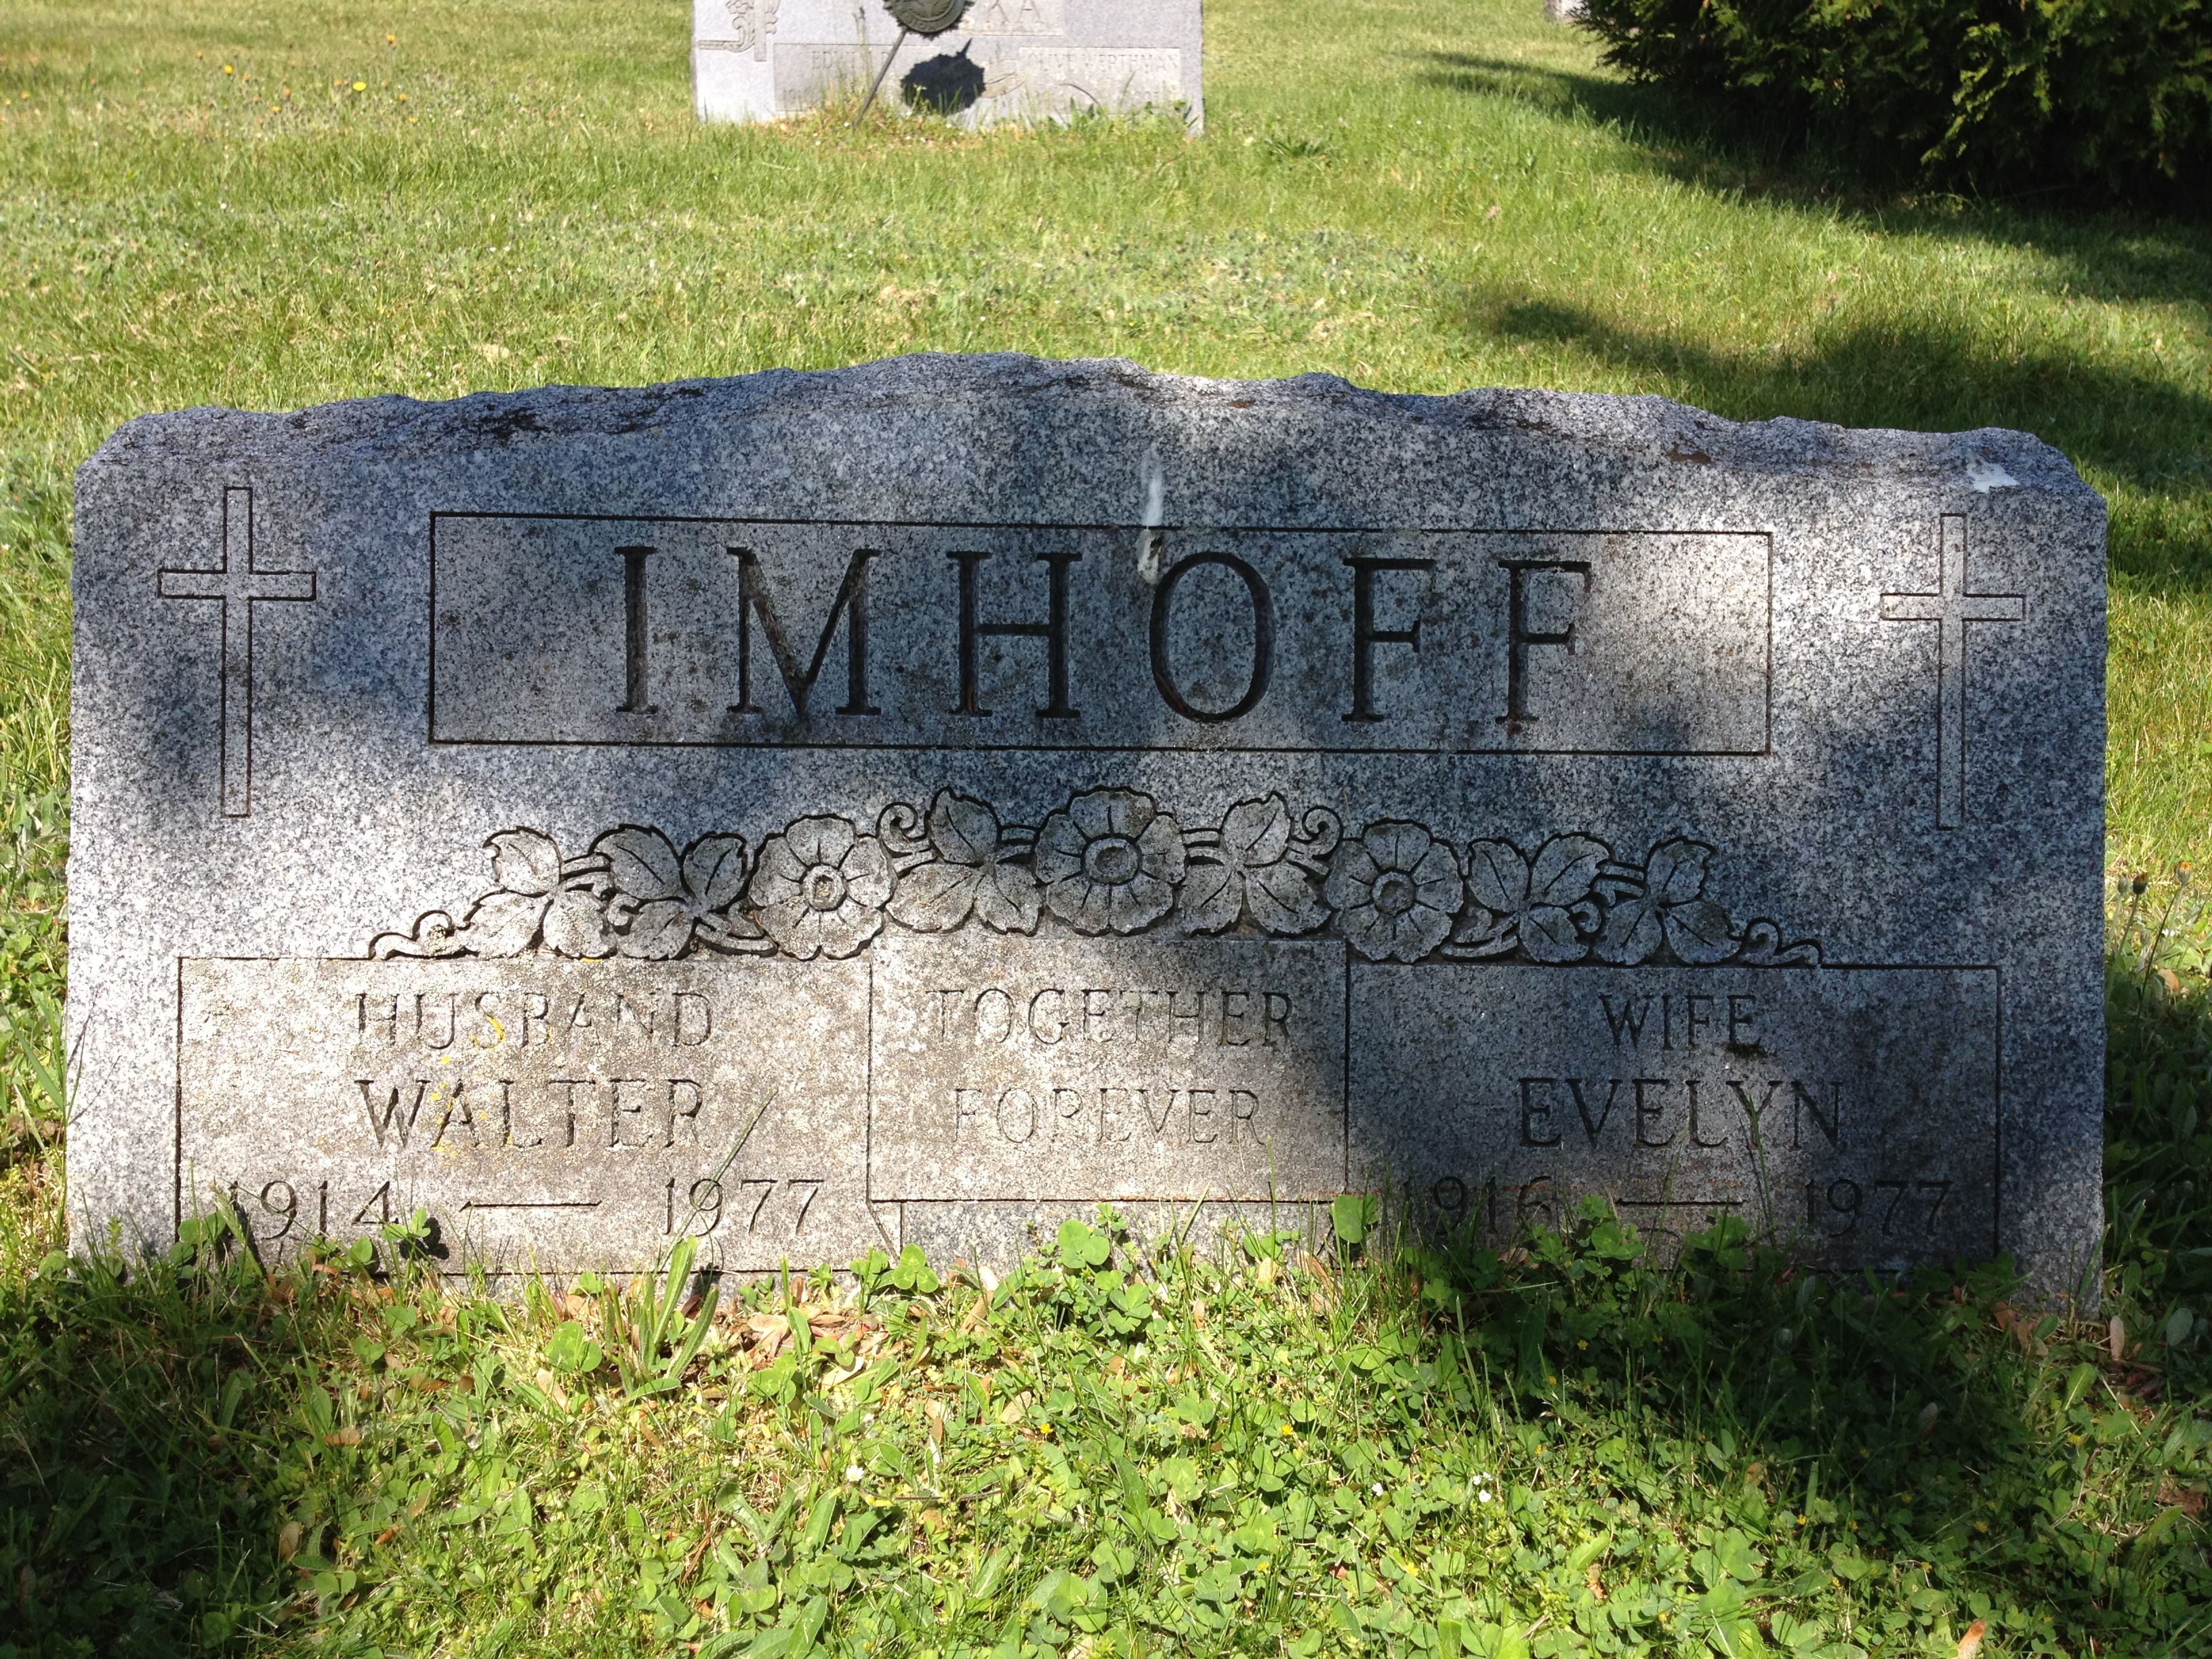 Headstone of Evelyn Cahow and Walter Imhoff